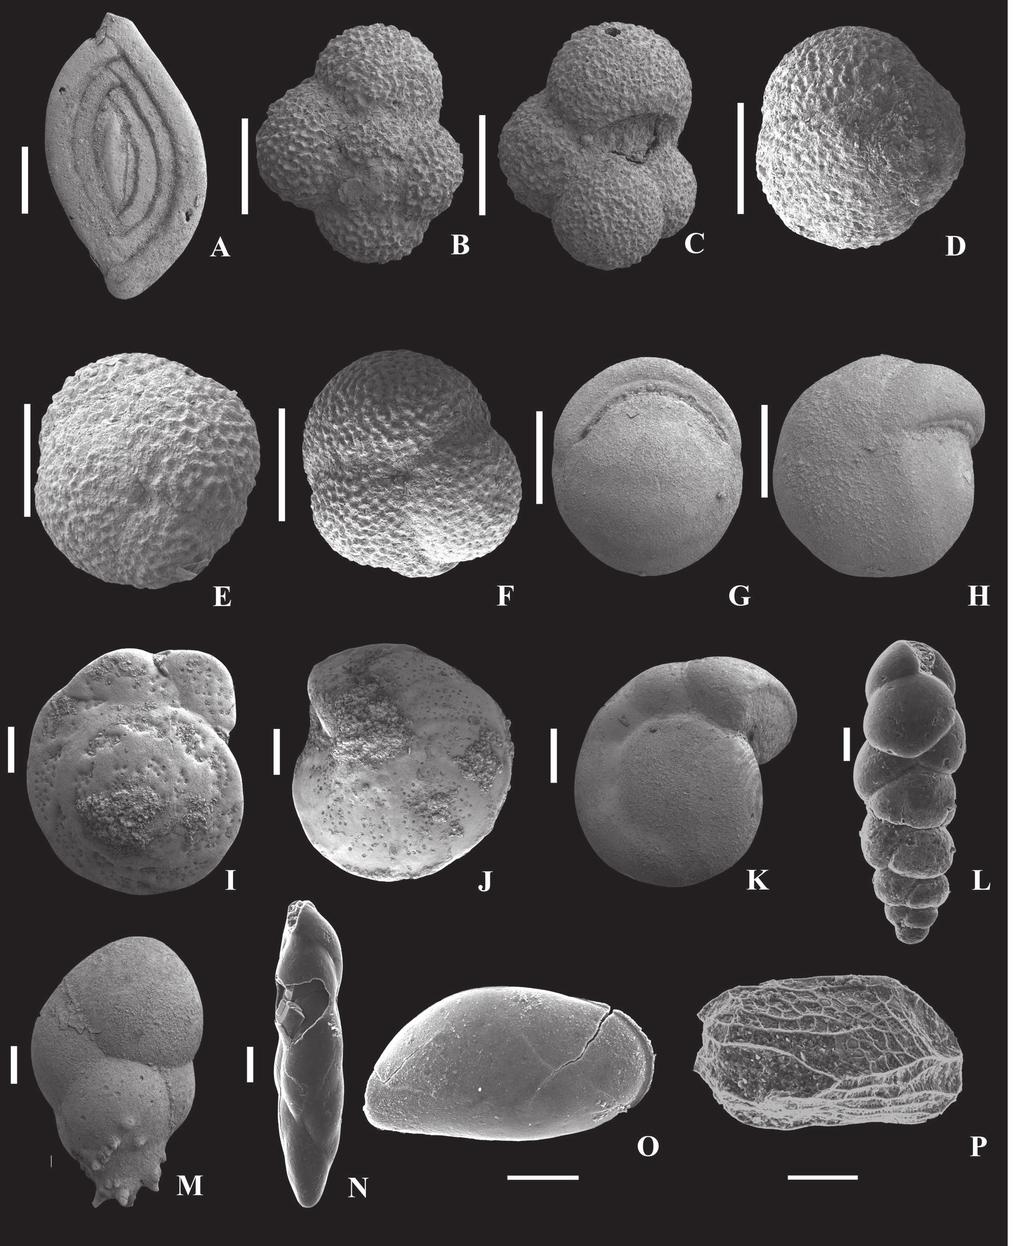 430 DUMITRIU, LOGHIN, DUBICKA, MELINTE-DOBRINESCU, PARUCH-KULCZYCKA and IONESI Fig 9 SEM photographs of the representative foraminifera and ostracoda species identified in the analysed samples A